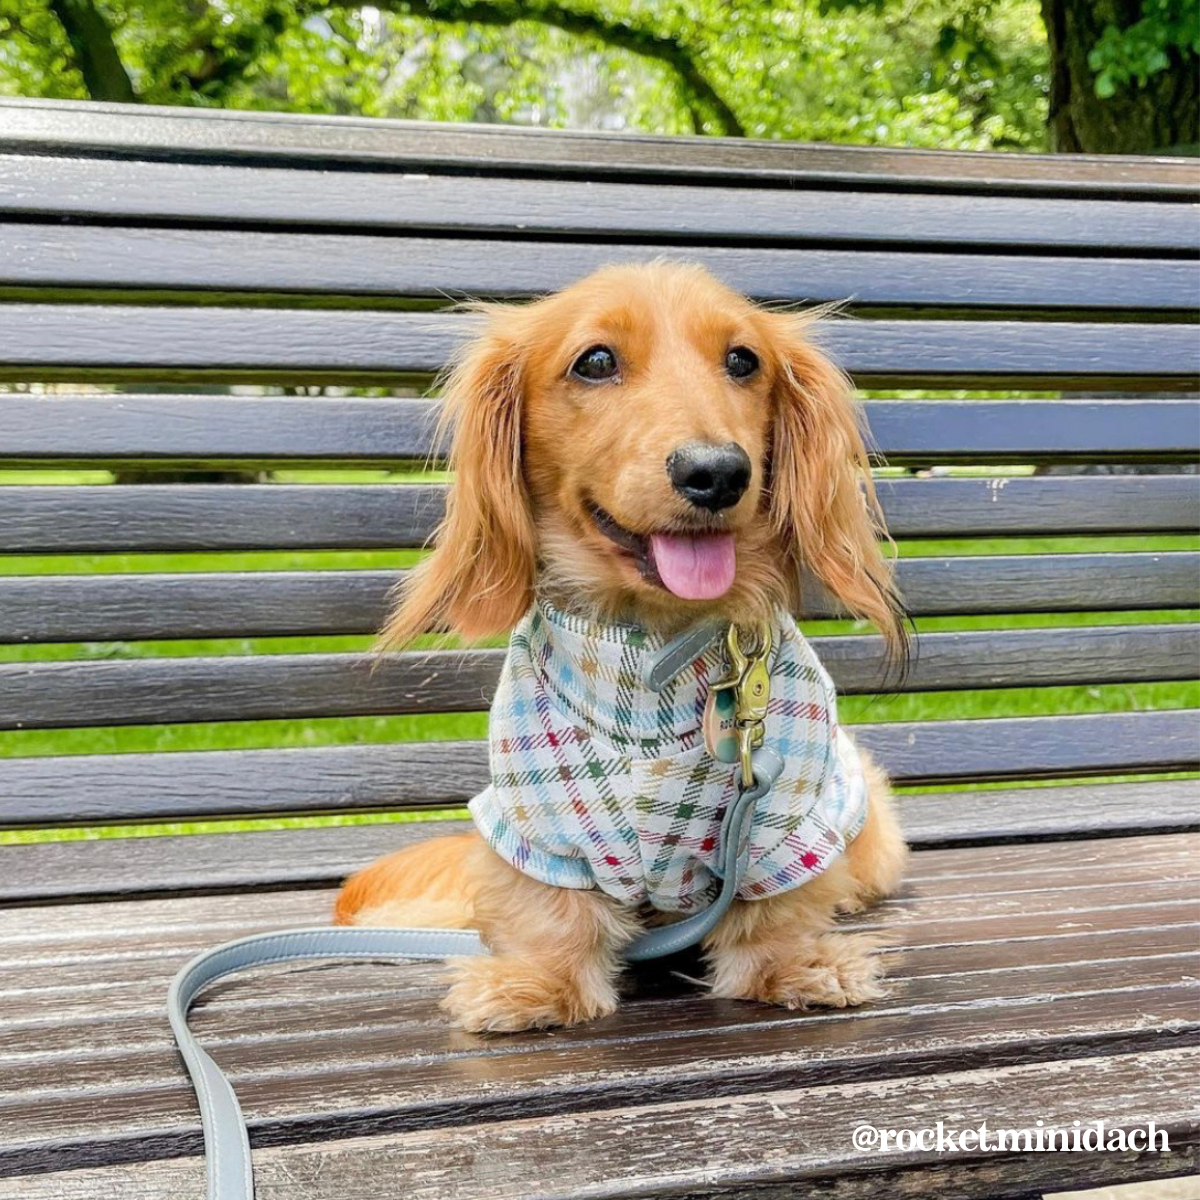 The Melbourne Sweater - Dachshund